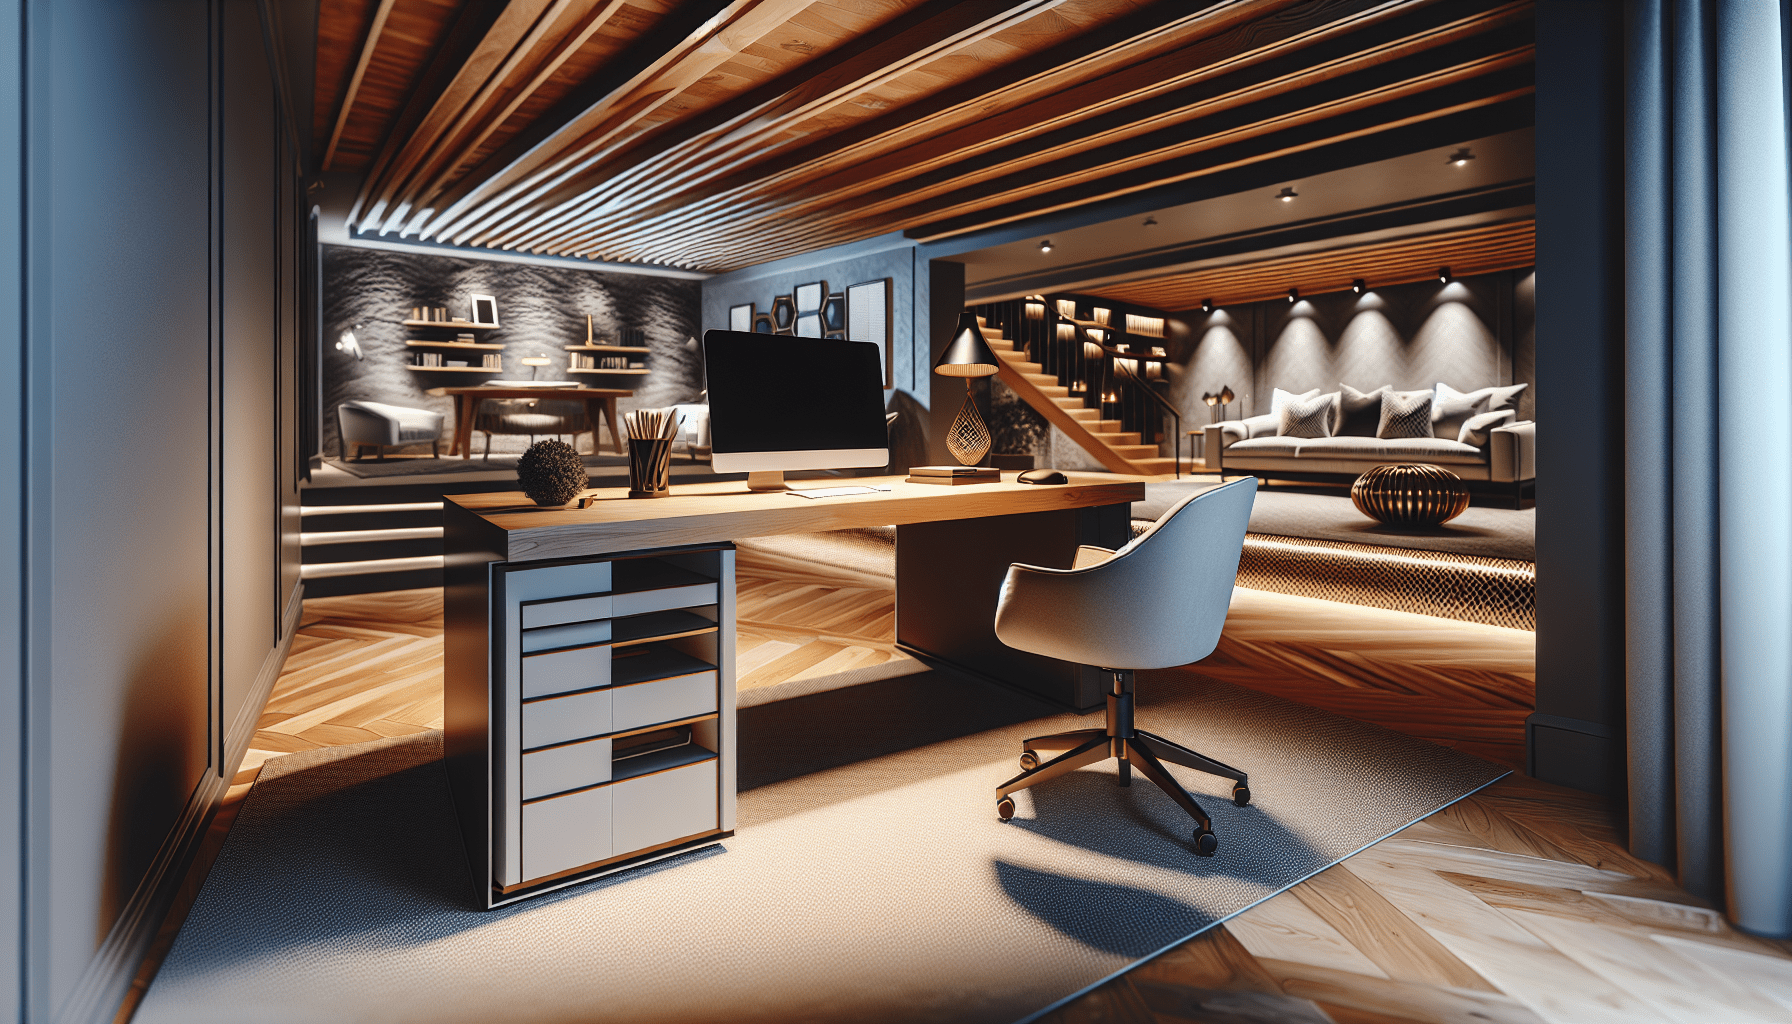 Transform Your Basement into a Stylish Home Office